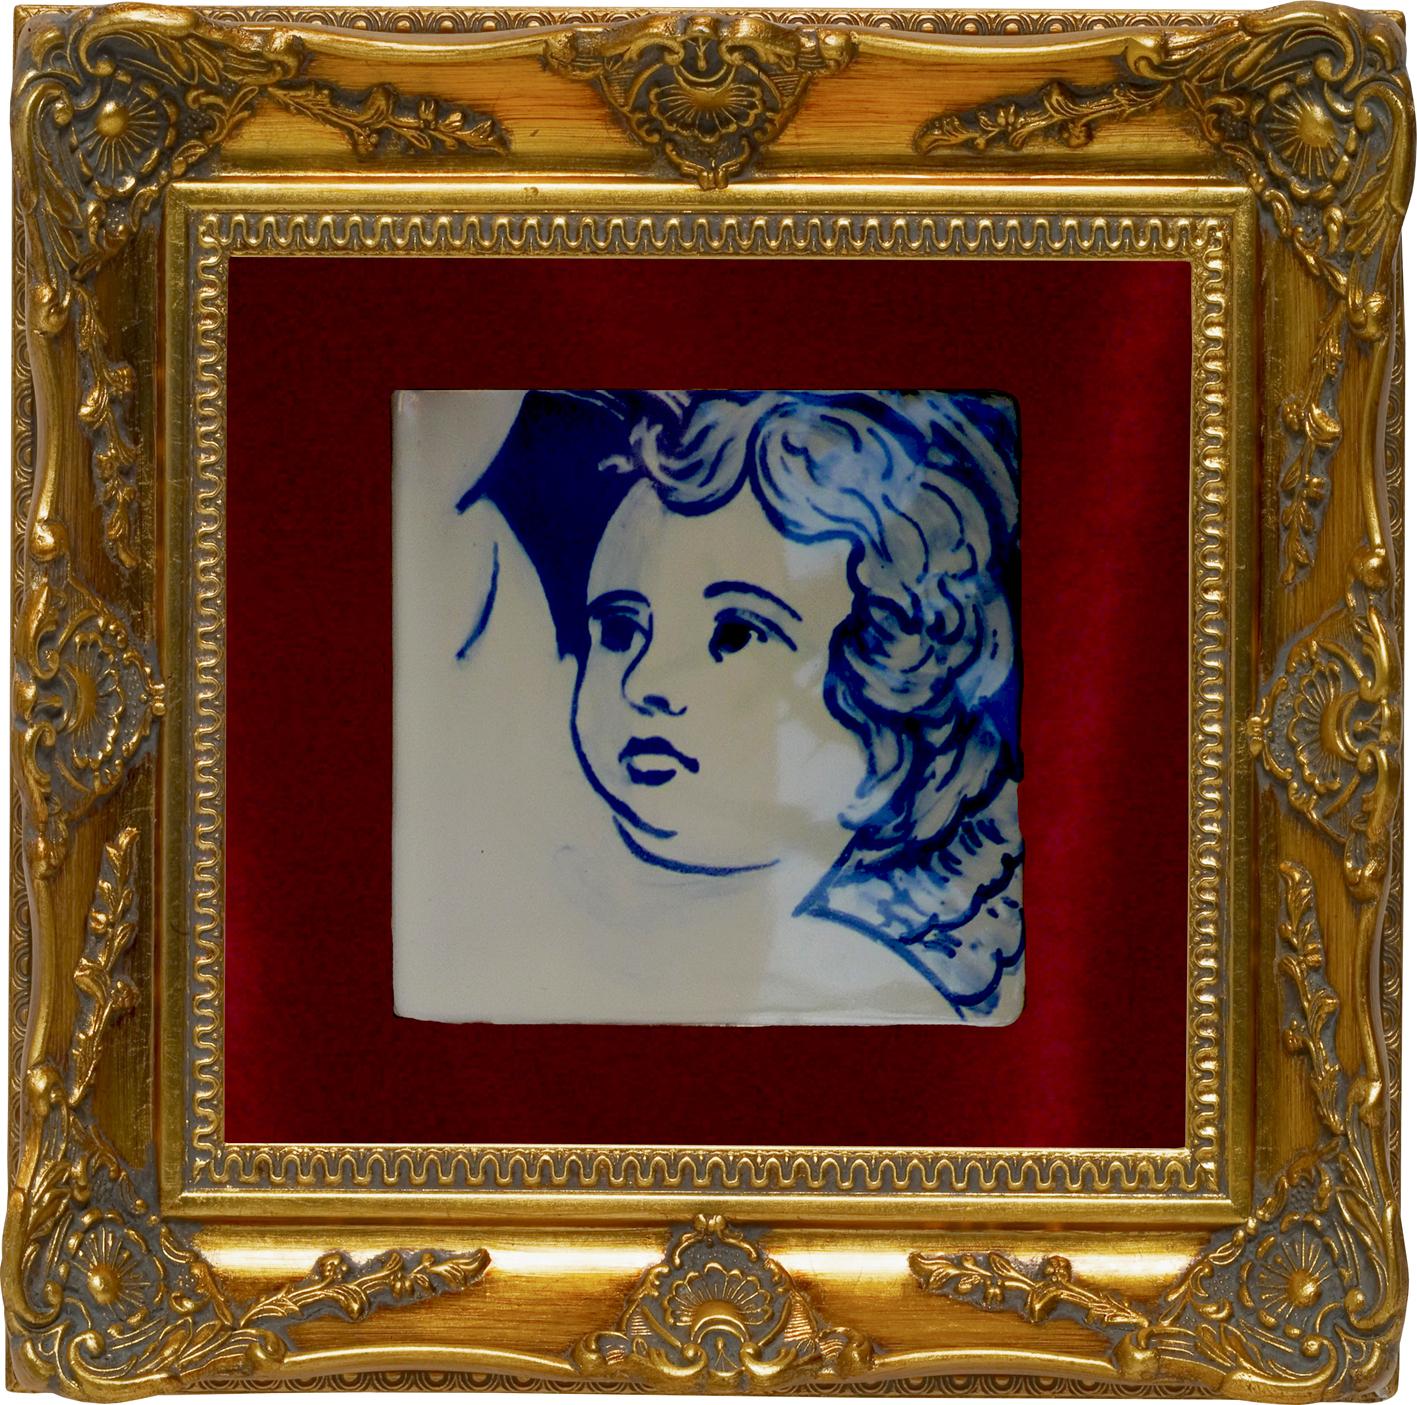 Gorgeous blue hand painted Baroque cherub or angel 18th century style Portuguese ceramic tile or Azulejo.
The tile painted in cobalt blue over white in typical 18th century Portugal set the taste for monumental ceramic tile applications in churches